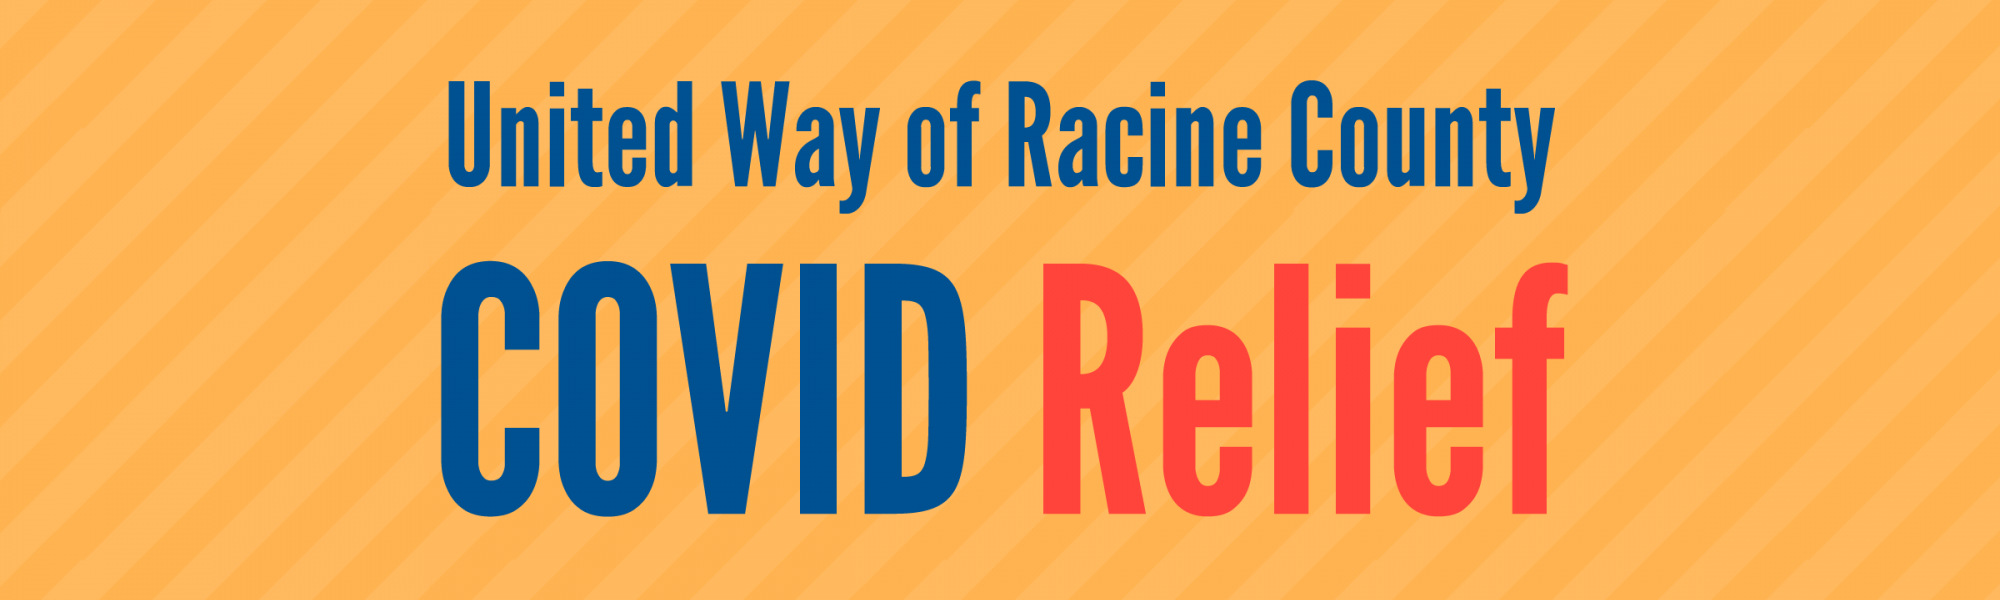 Dark blue and red text that says "United Way of Racine County COVID Relief" on top of a yellow, striped background.